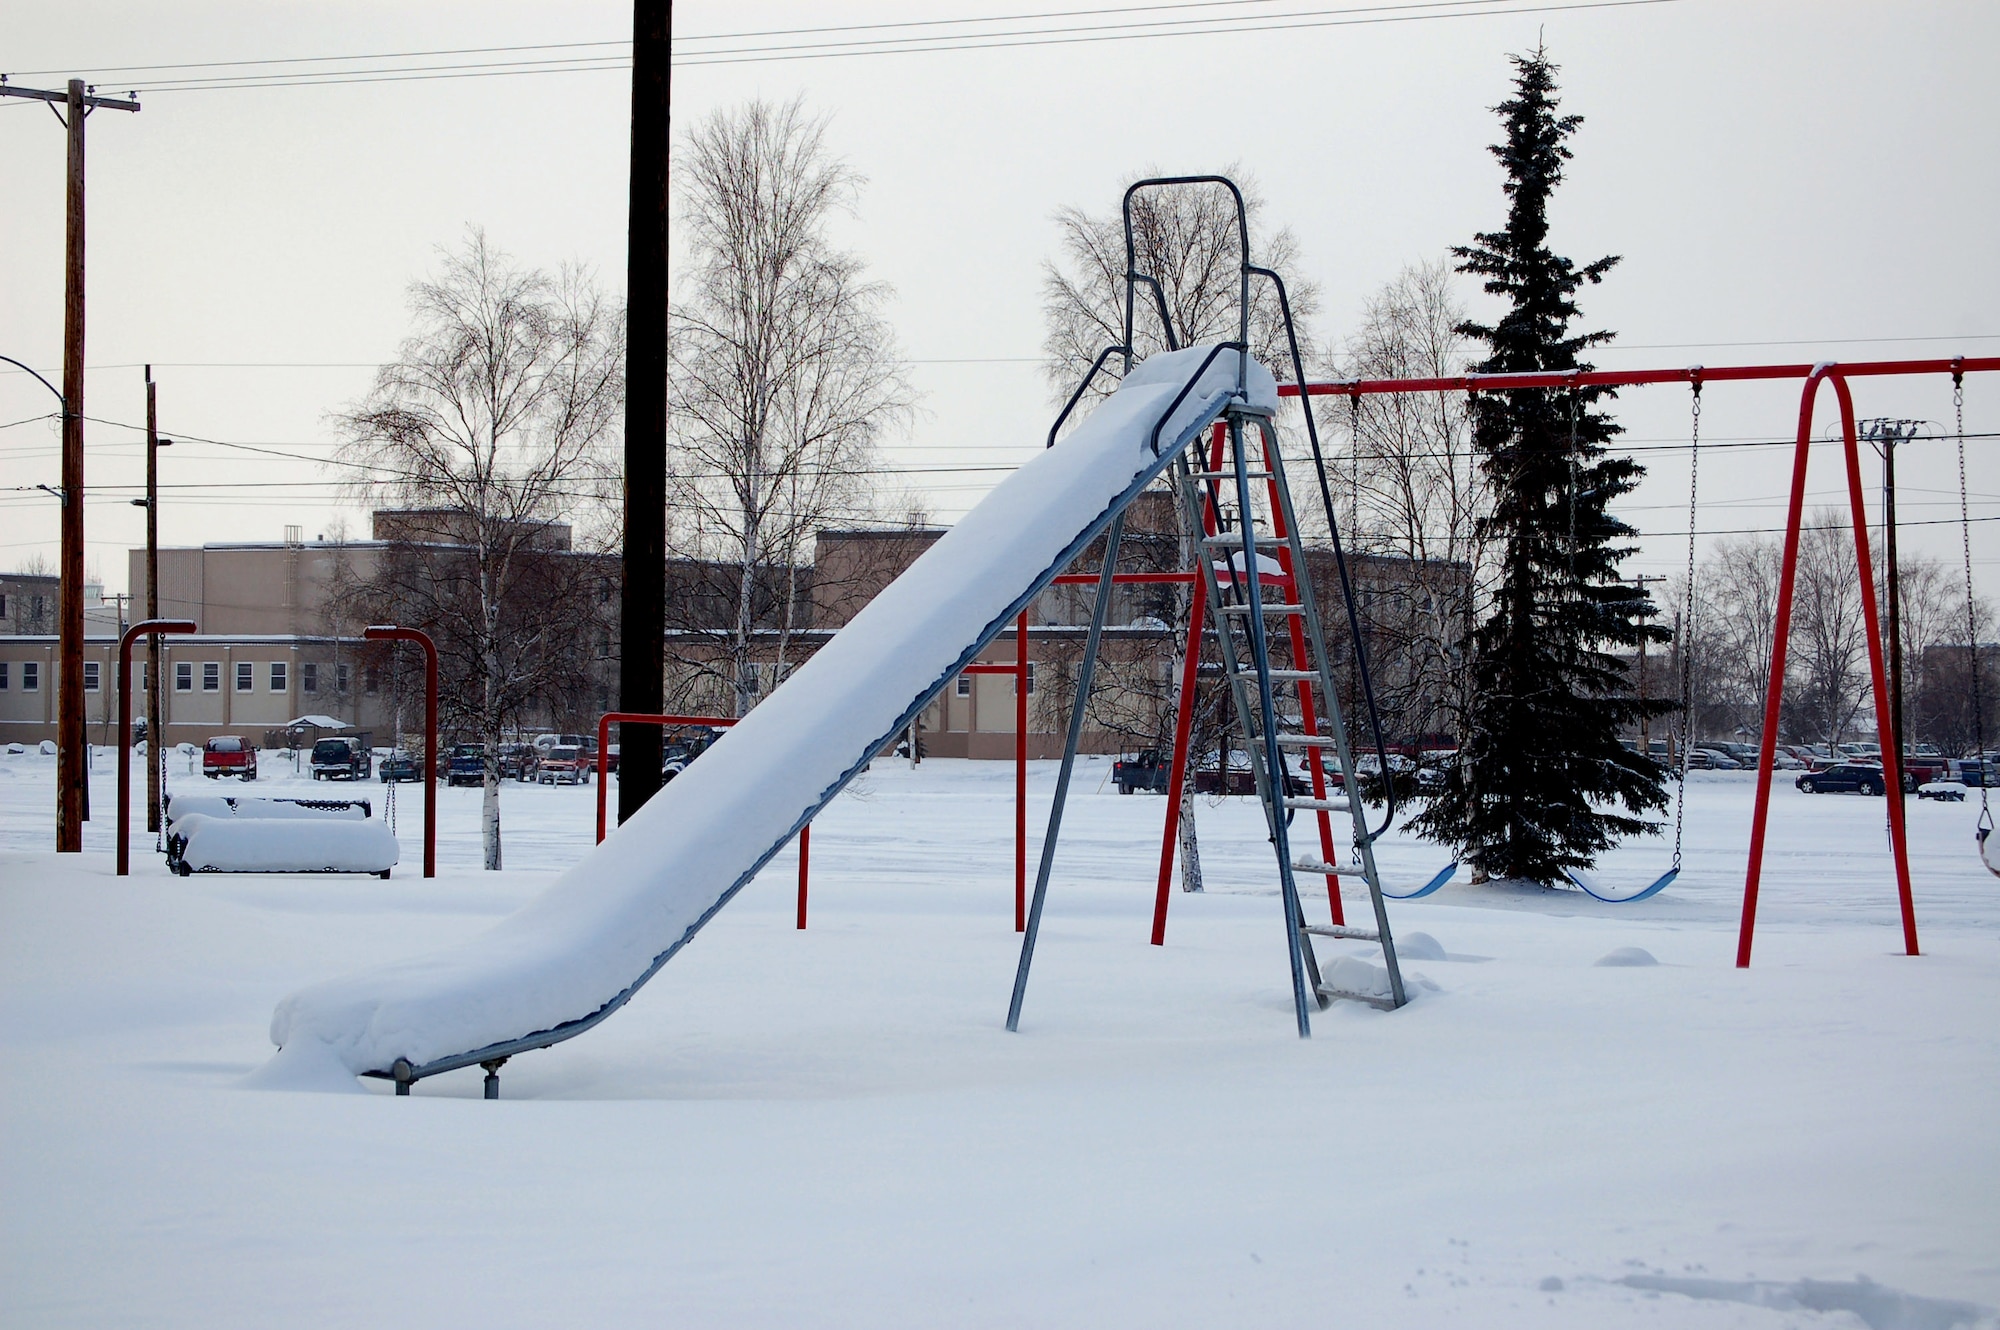 An abandoned playground sits covered in snow in the Sprucewood Homes section of base housing Feb. 27 at Eielson Air Force Base, Alaska. Three hundred Air Force families had to be moved out of the privatized housing into new housing from September to December. The reason for the move was due to a conclusion of a privatized housing contract that wasn't able to be renegotiated. (U.S. Air Force photo/Staff Sgt. Matthew Rosine)